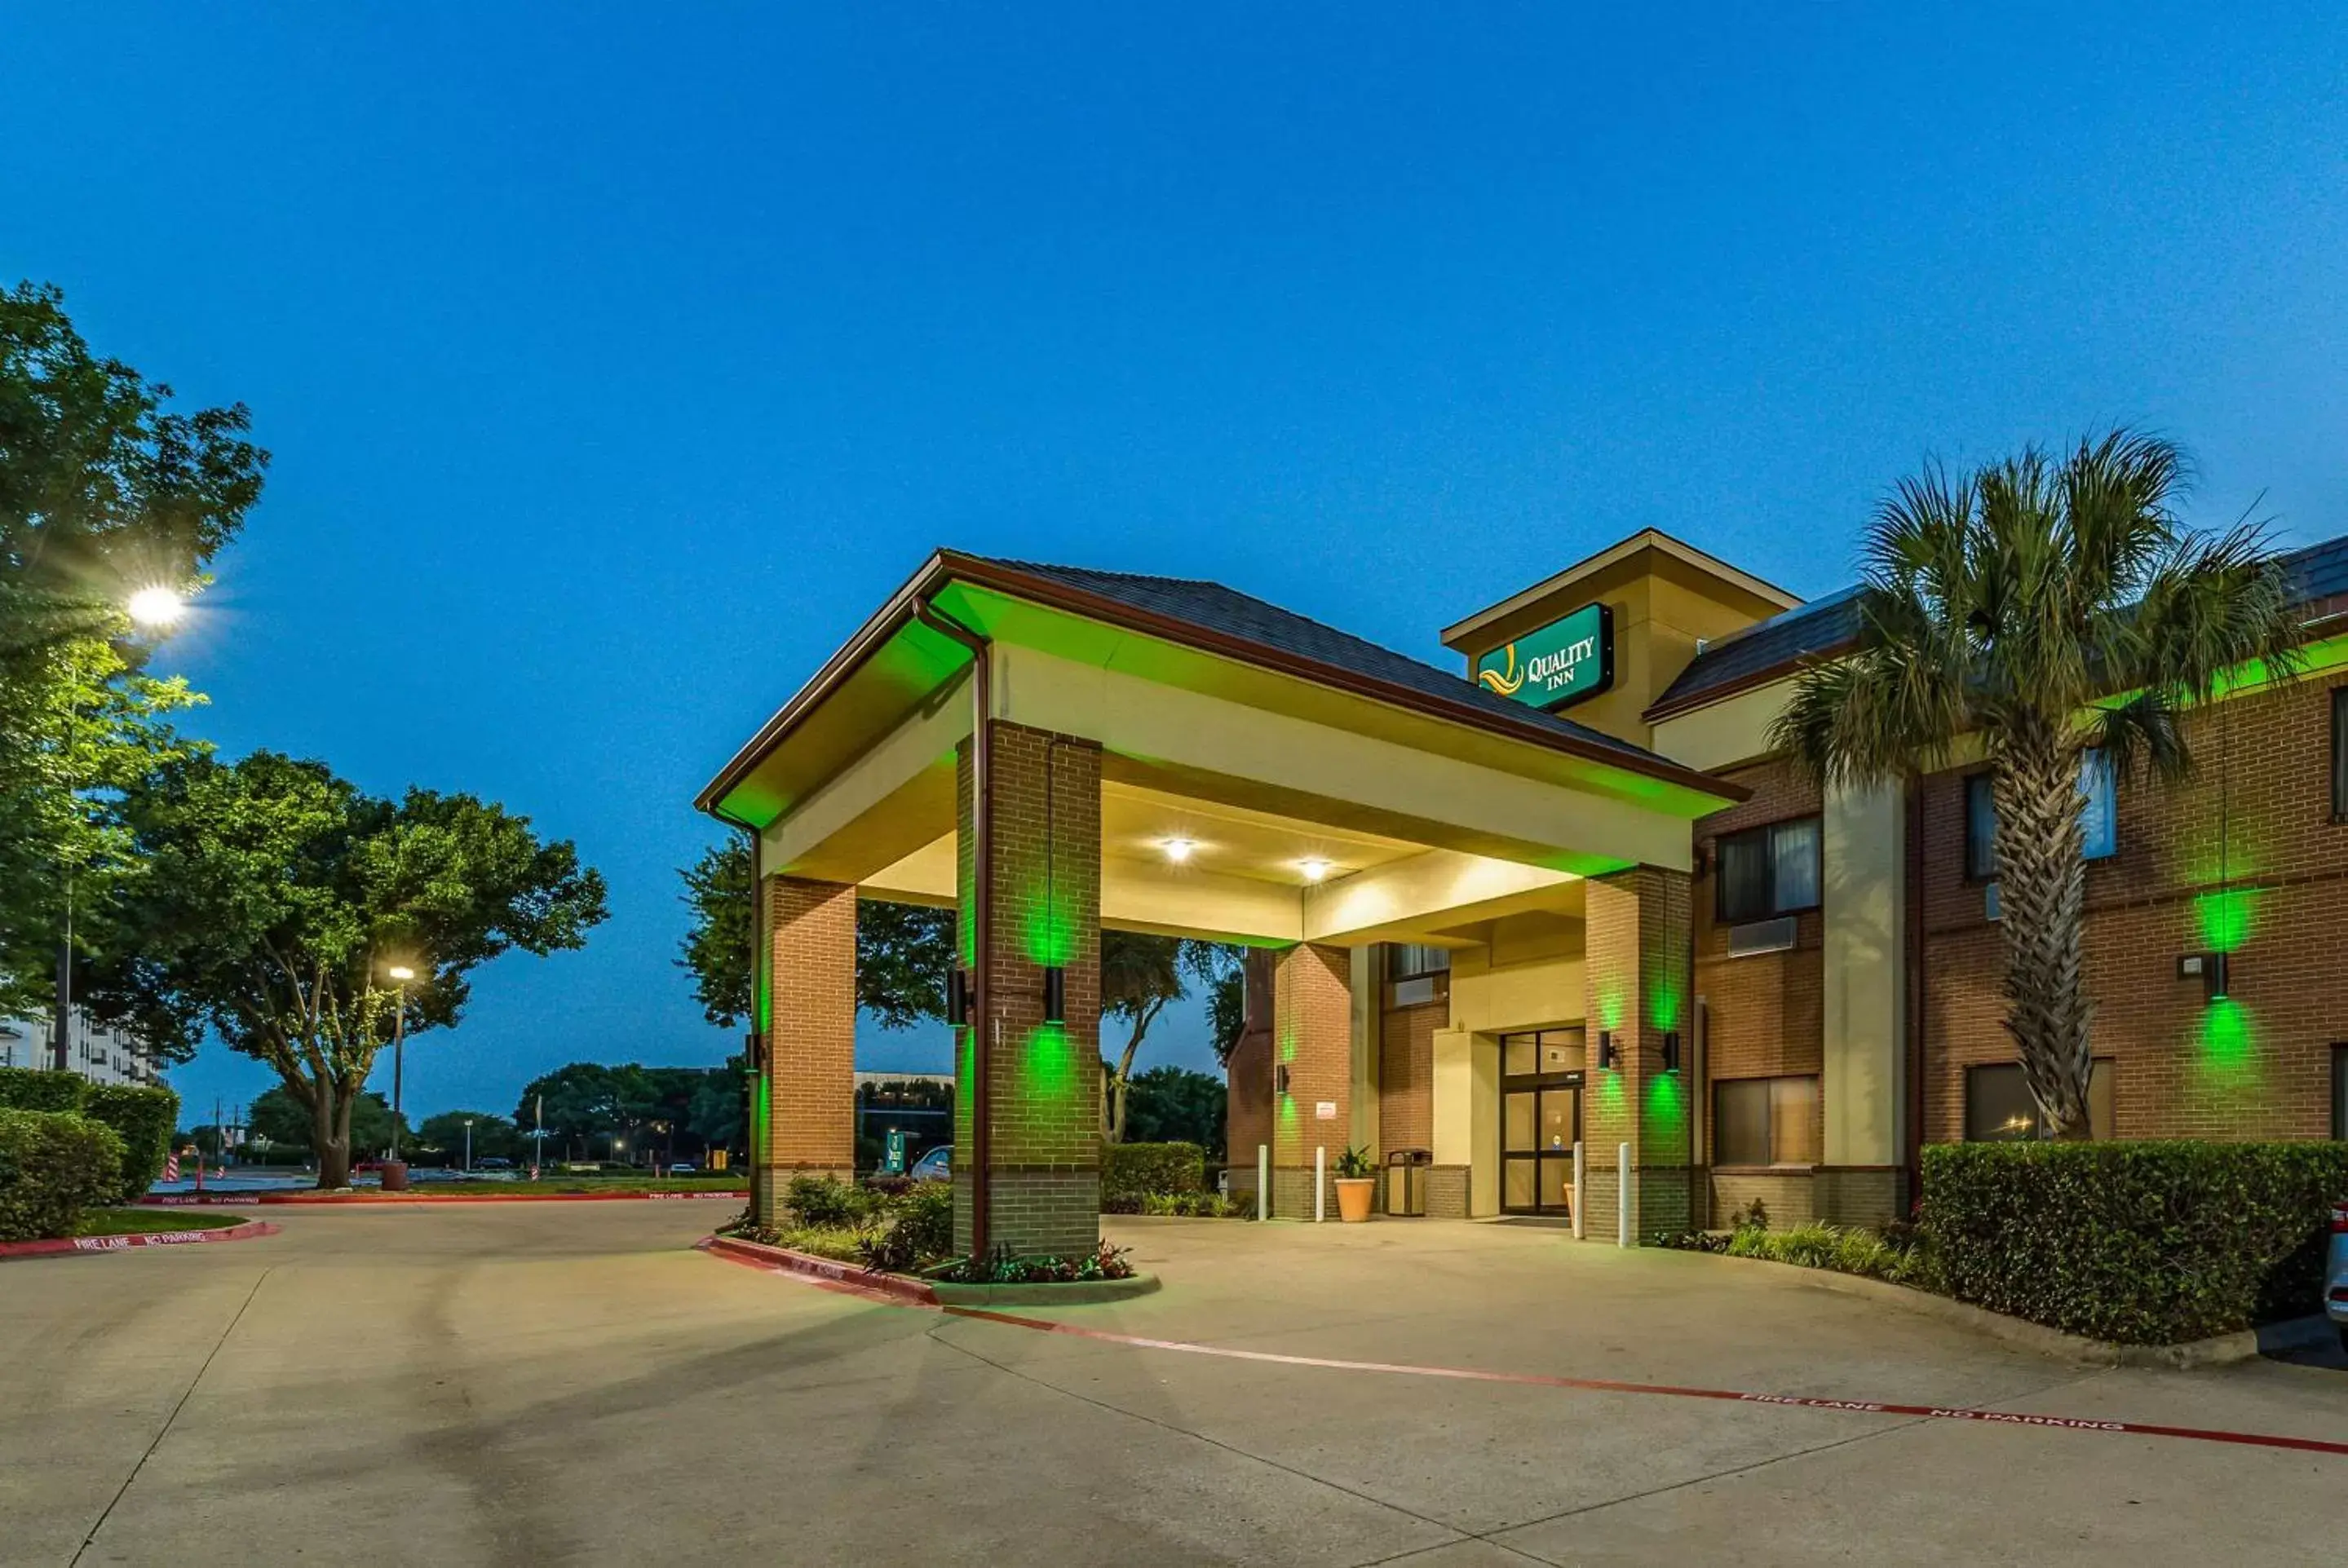 Property building in Quality Inn West Plano - Dallas